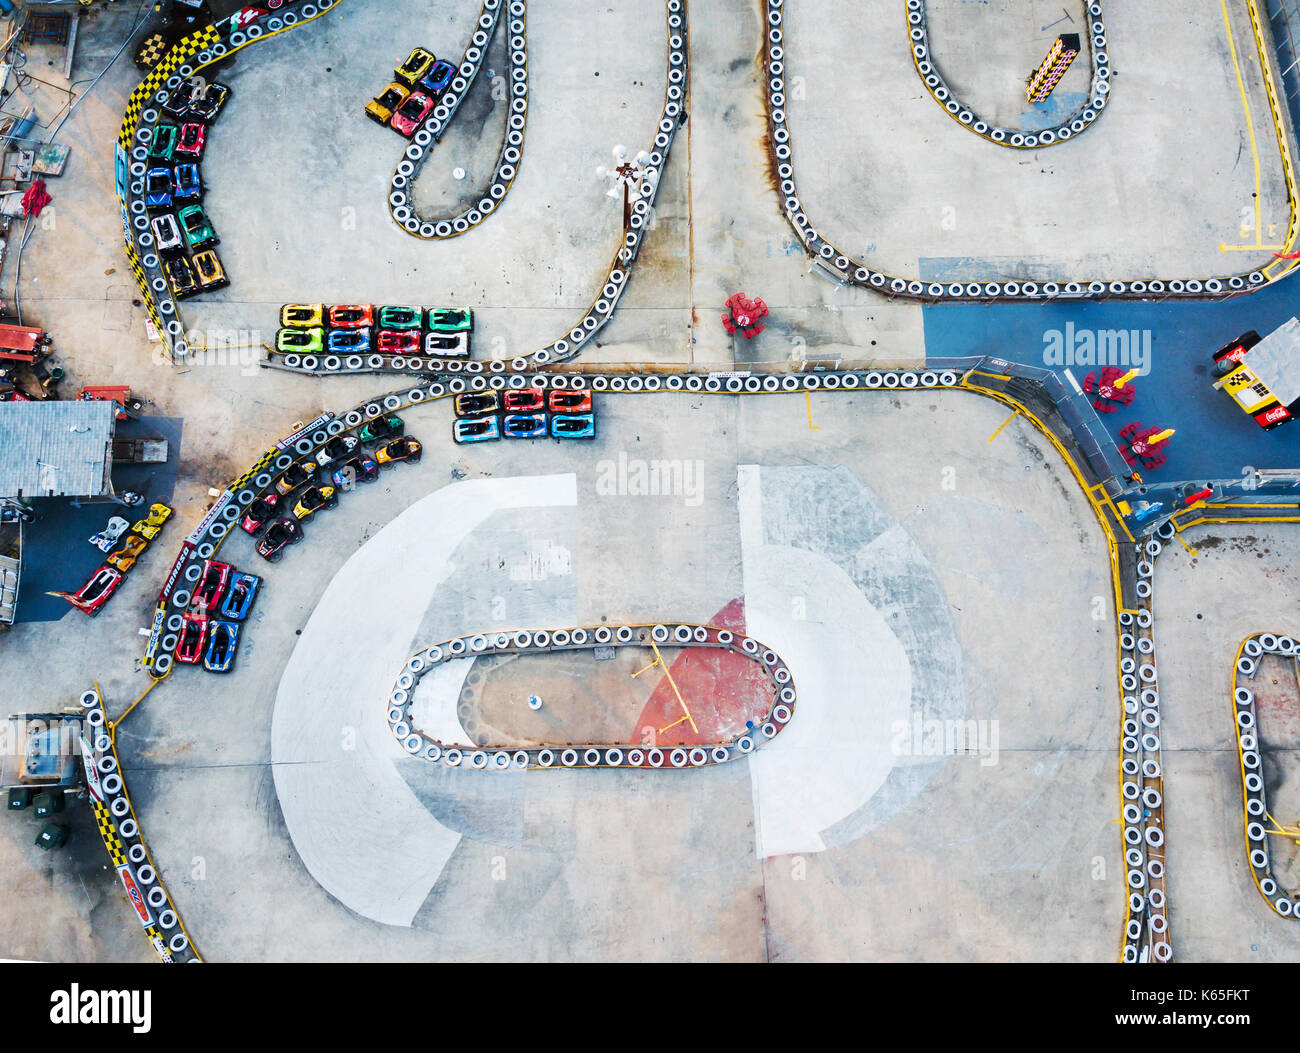 WILDWOOD, NEW JERSEY, USA - SEPTEMBER 5, 2017: Racing carts track aerial view with no people in the Moreys Piers and Beachfront Water Parks complex Stock Photo